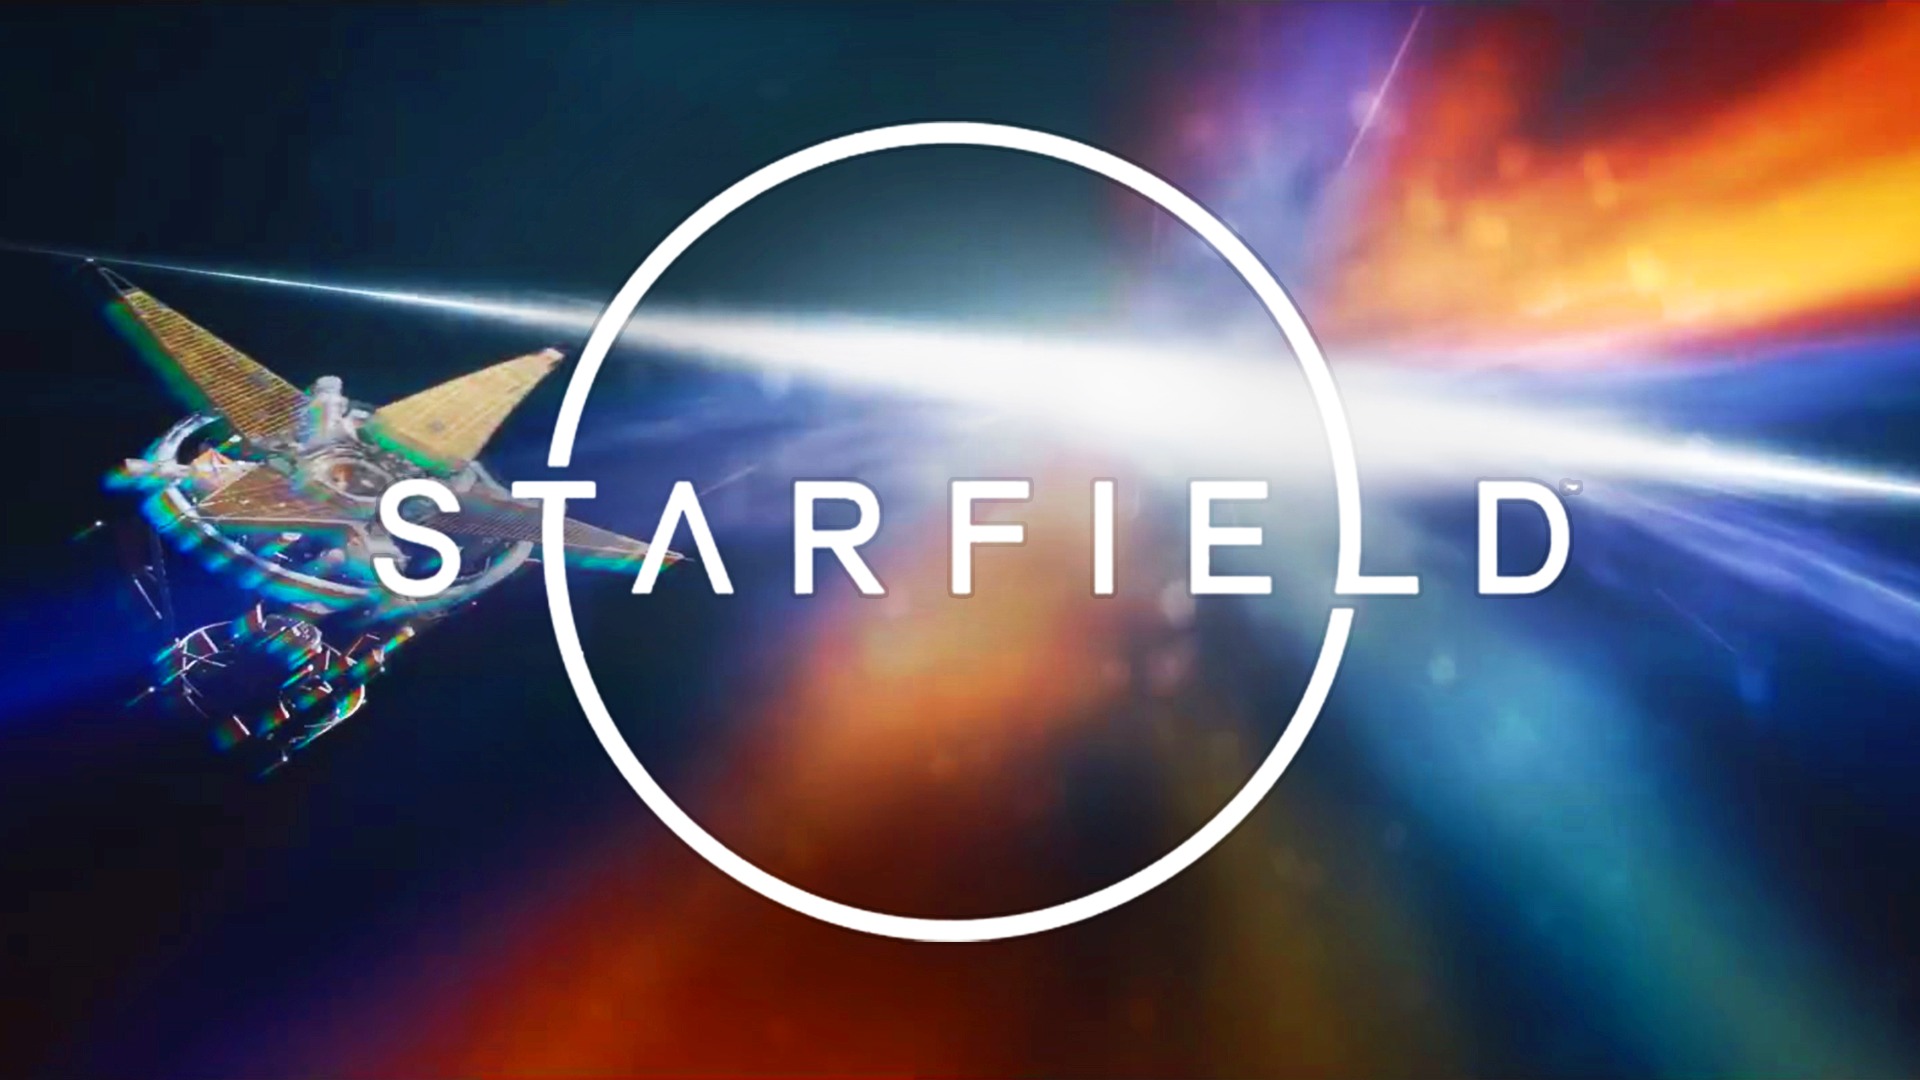 Starfield legally becomes 'Starfield' next month